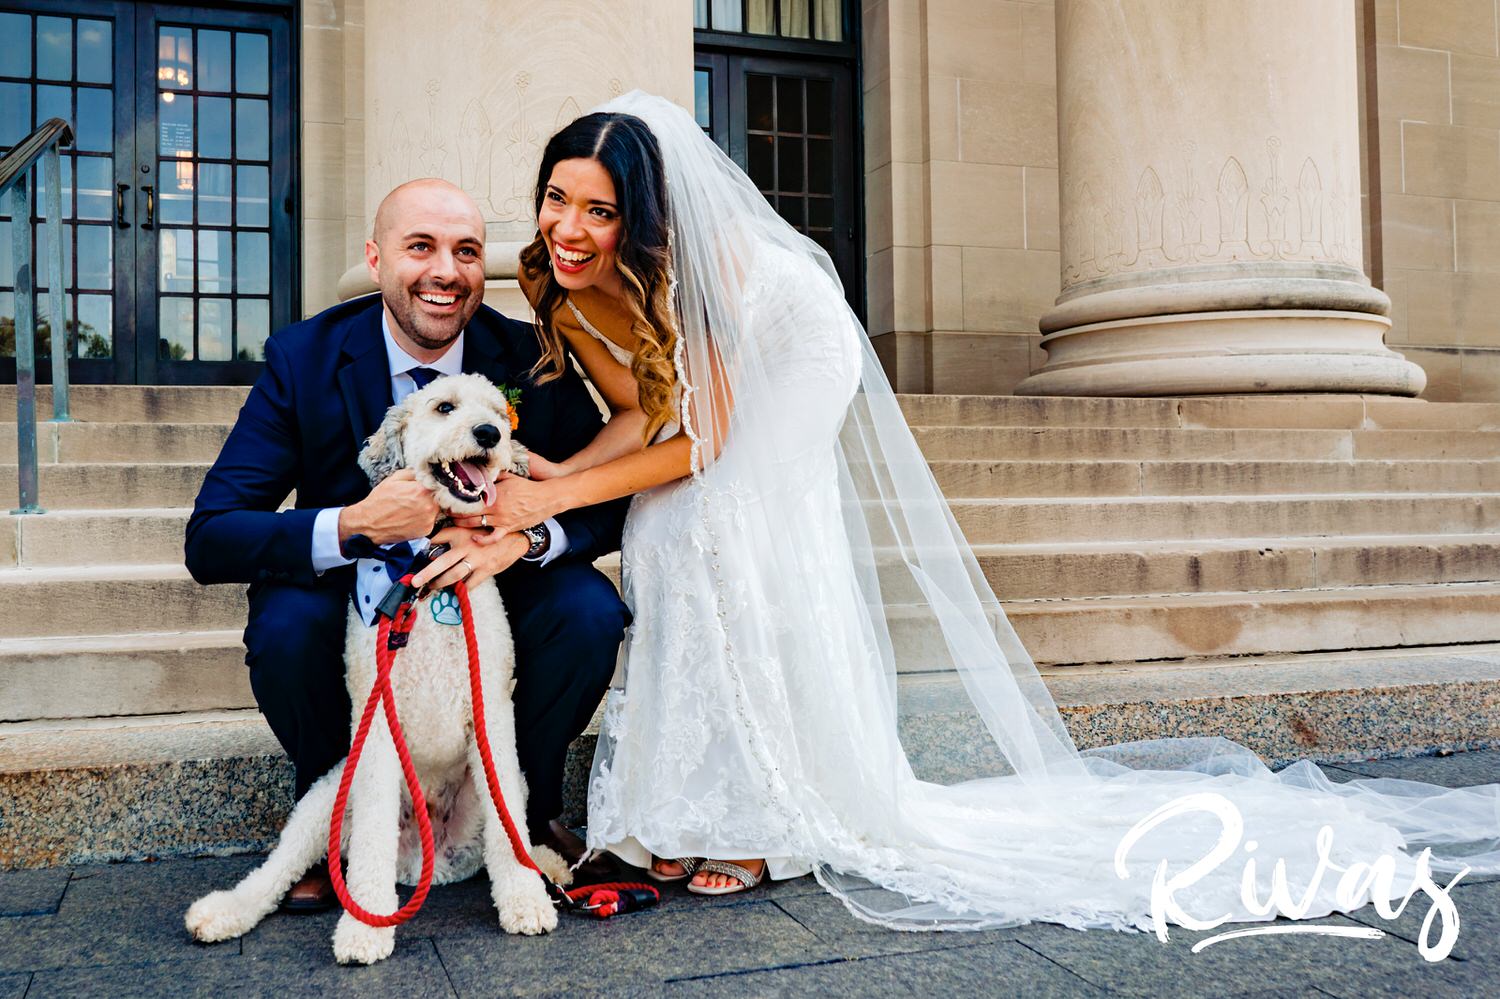 A vibrant, candid picture of a bride and groom loving on their poodle on the steps of The Nelson Atkins Museum of Art in Kansas City on their wedding day.